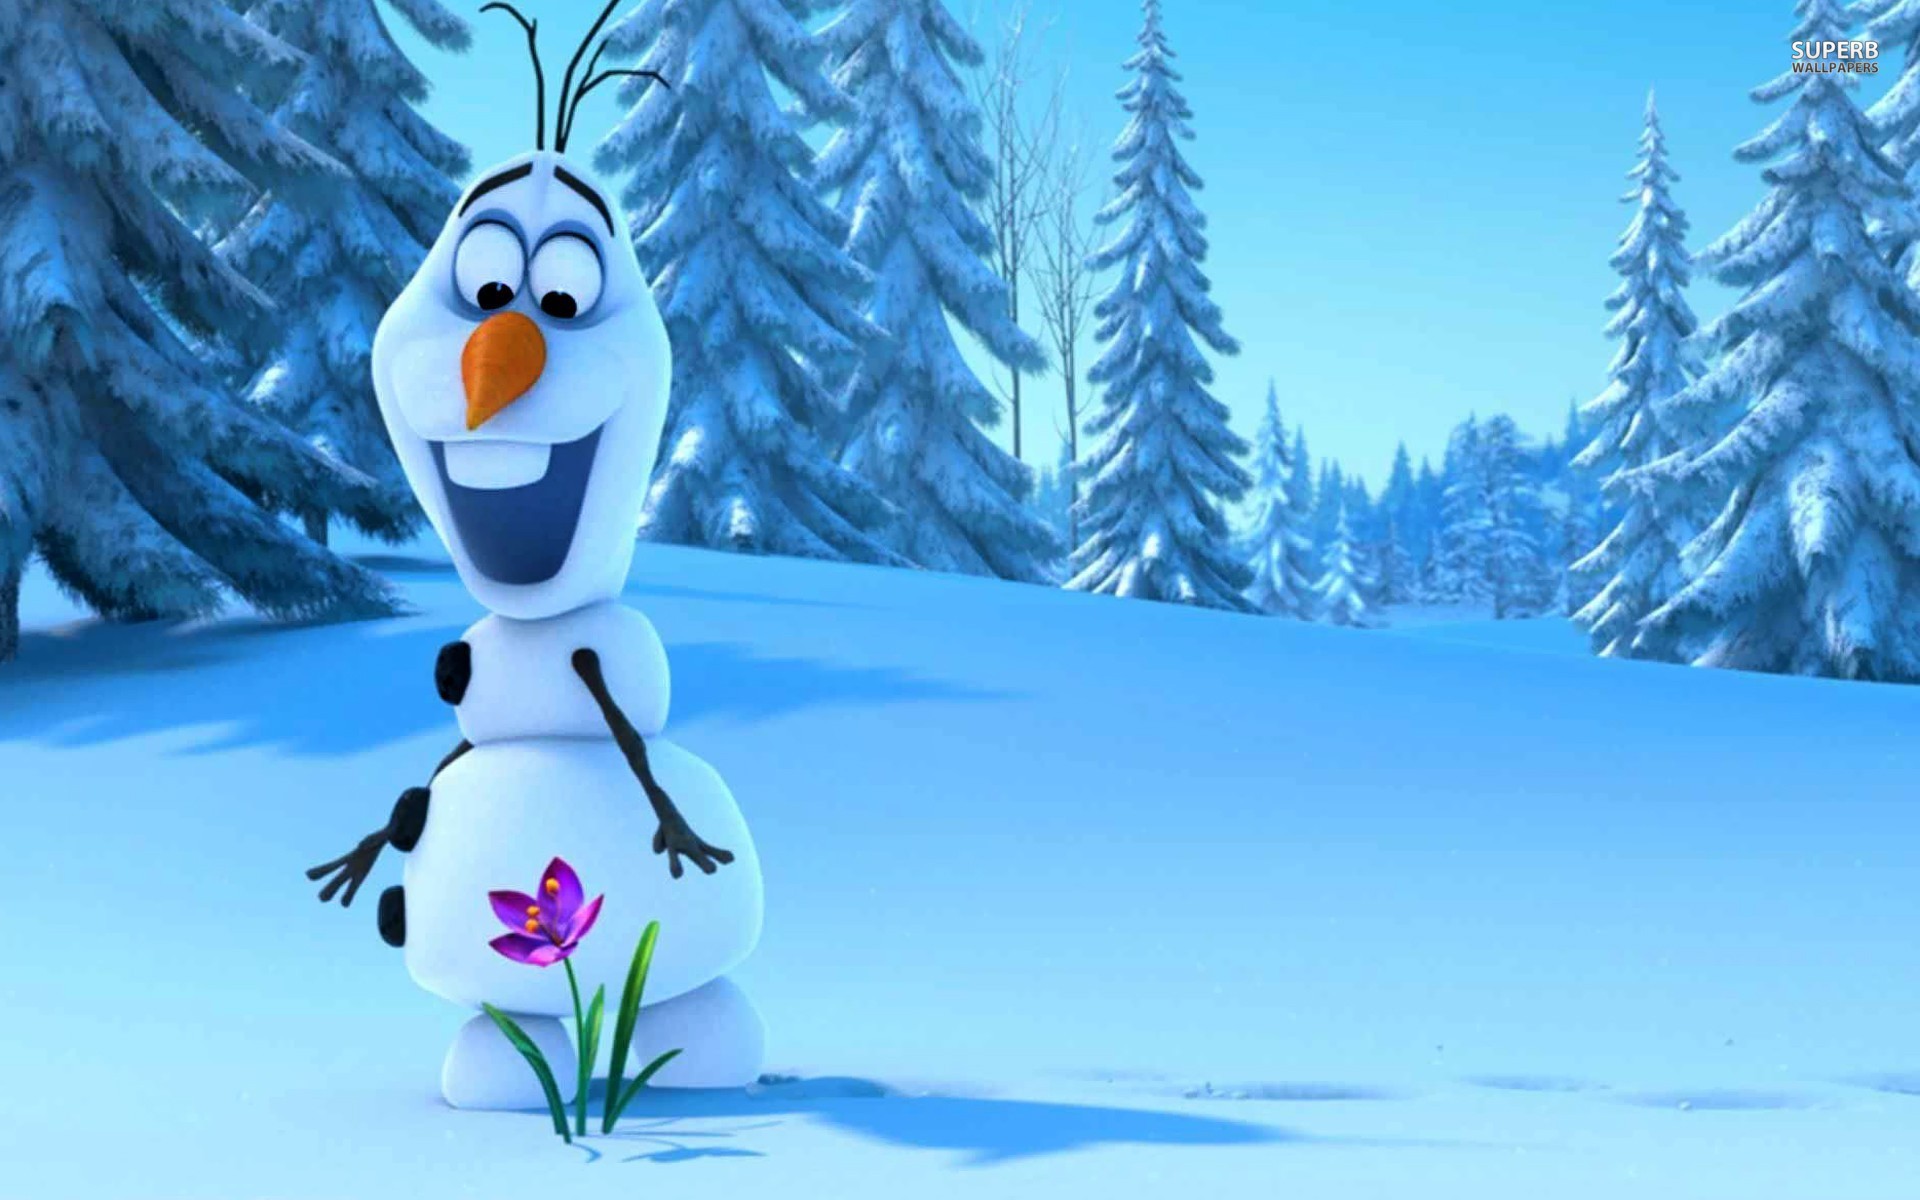 Frozen Olaf wallpapers and images   wallpapers pictures photos 1920x1200